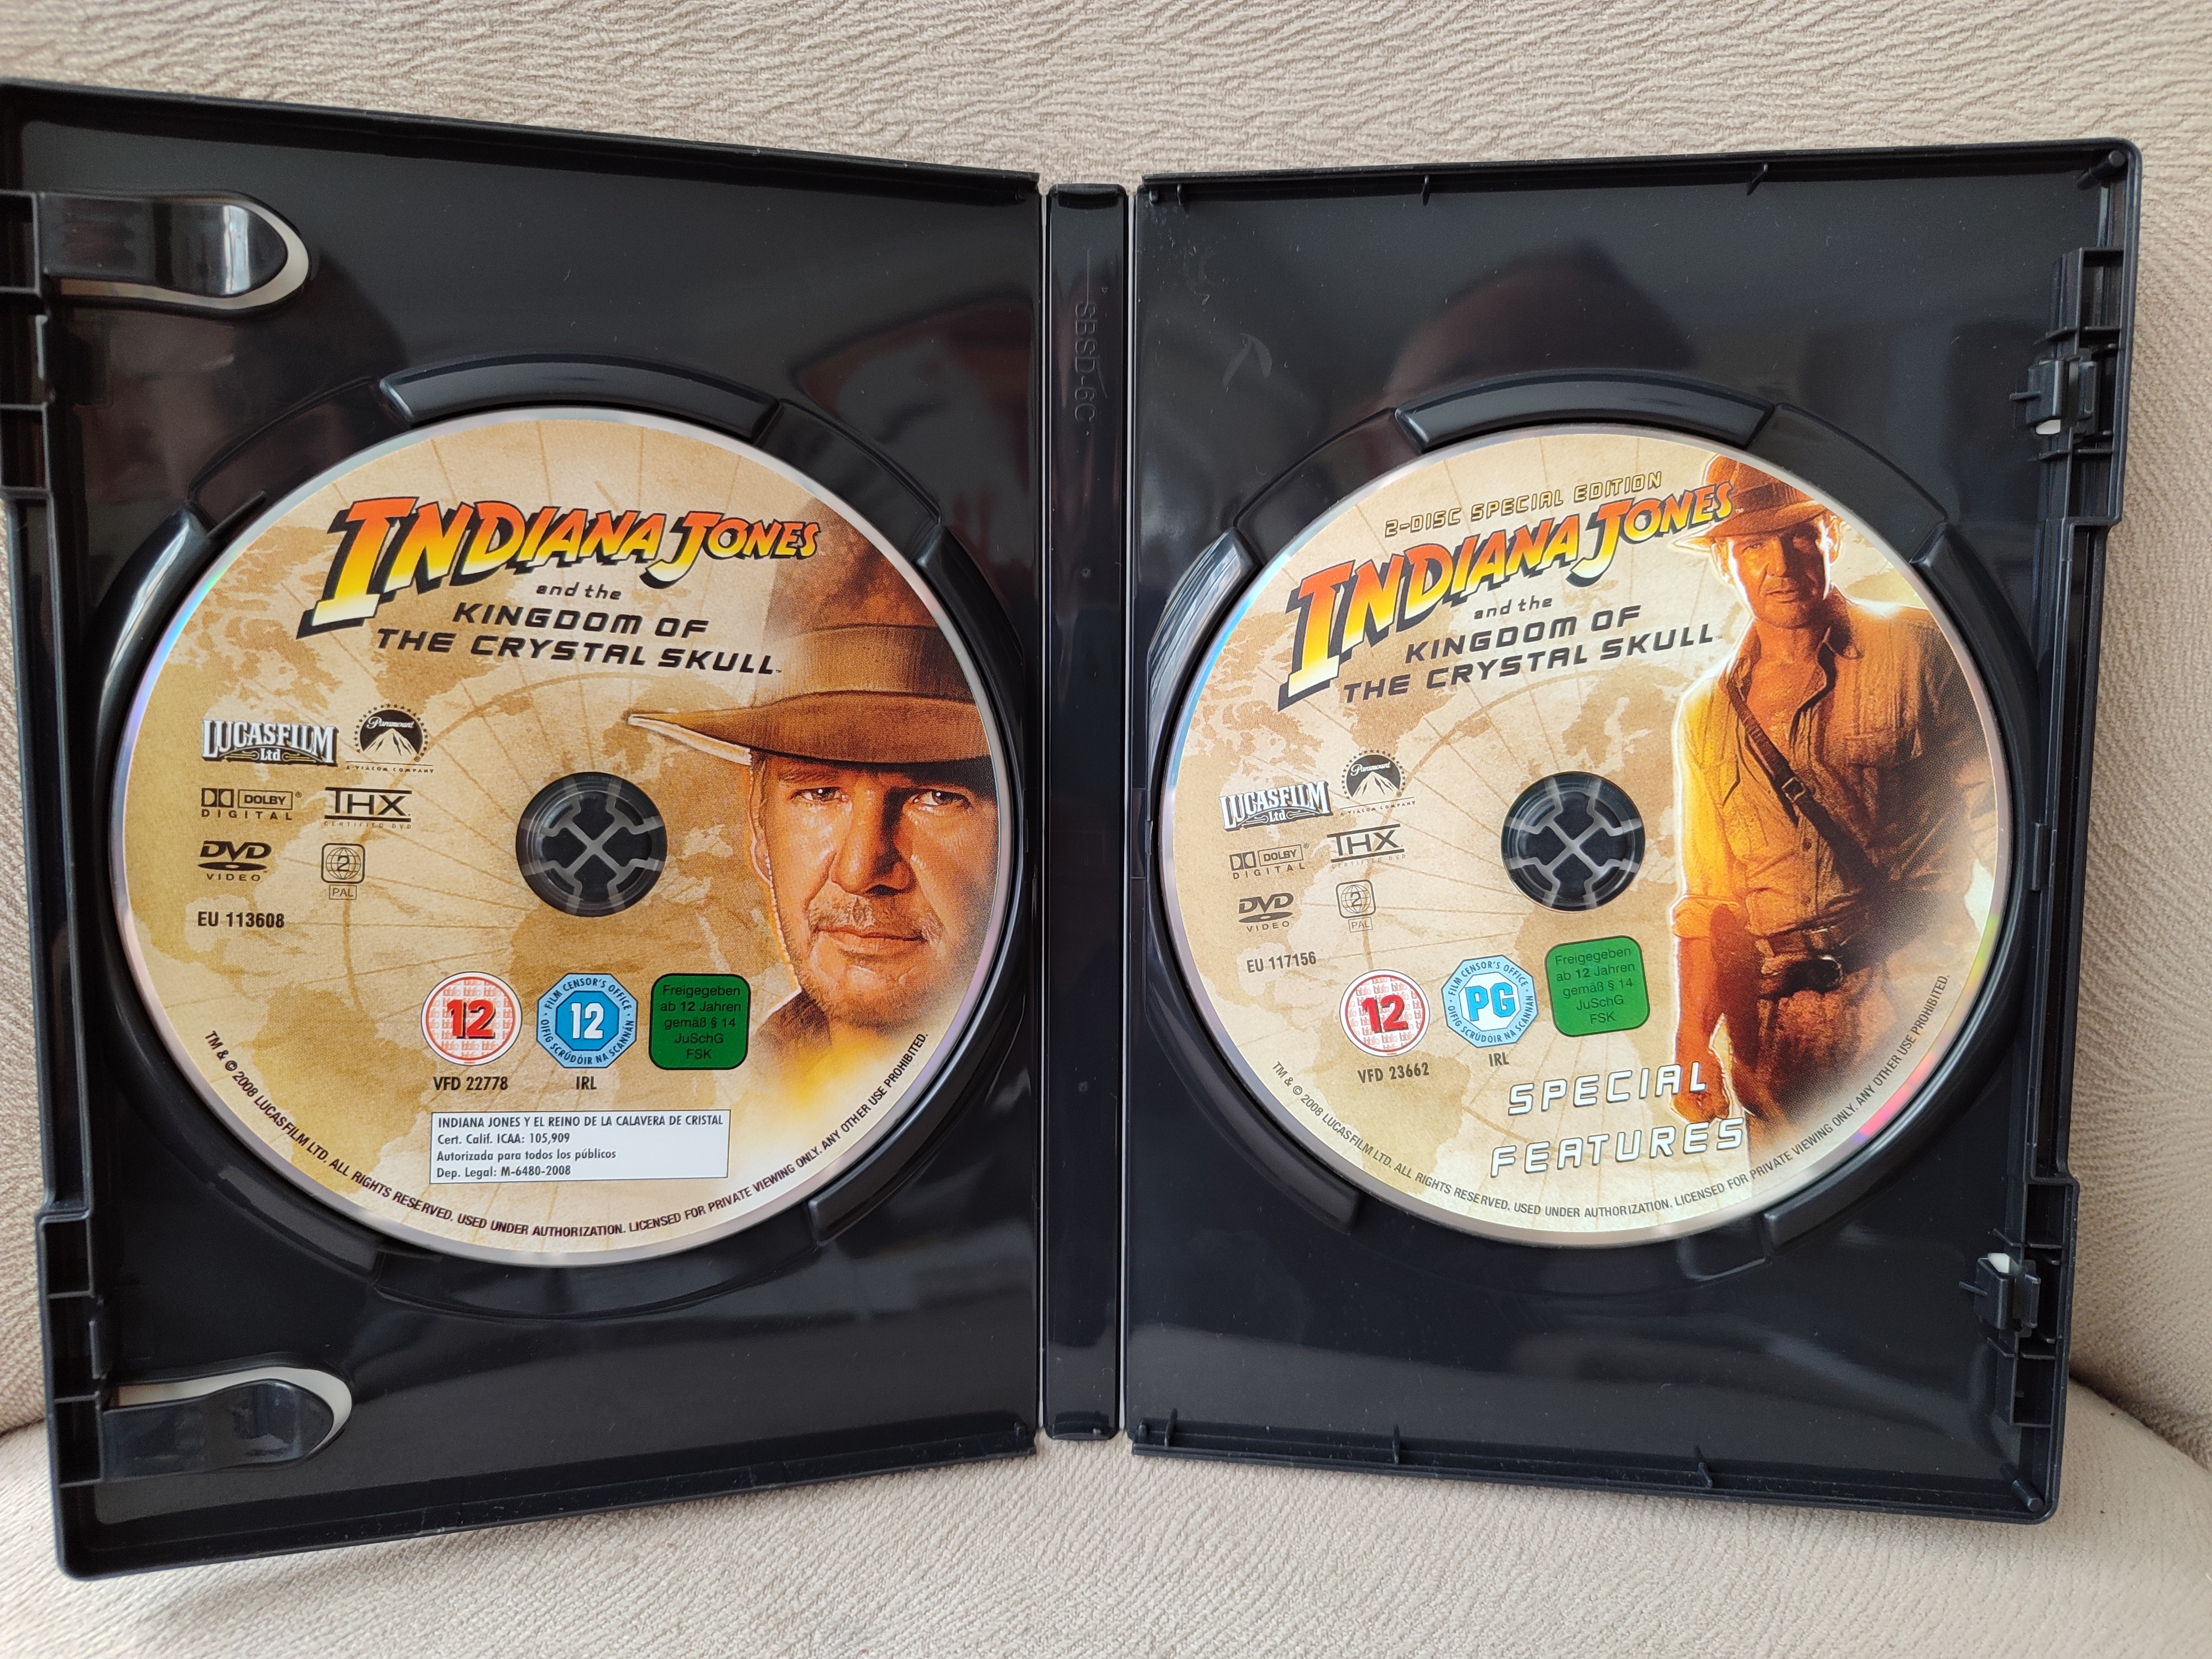 INDIANA JONES and The Kingdom of The Crystal Skull - 2 Disc Special Edition DVD 2. EL